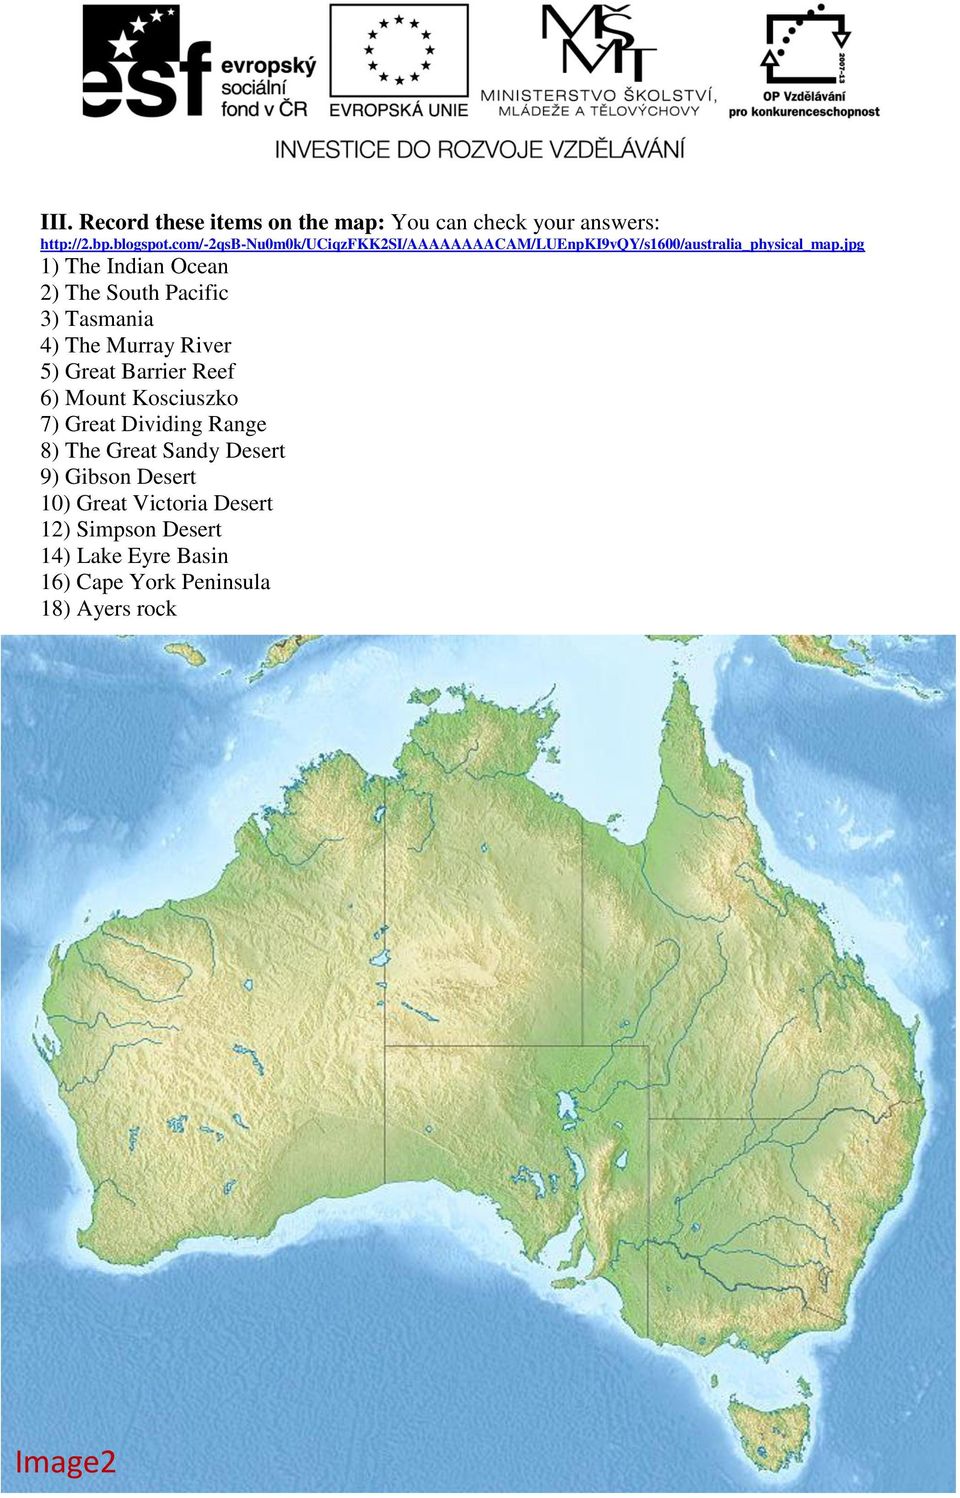 jpg 1) The Indian Ocean 2) The South Pacific 3) Tasmania 4) The Murray River 5) Great Barrier Reef 6) Mount Kosciuszko